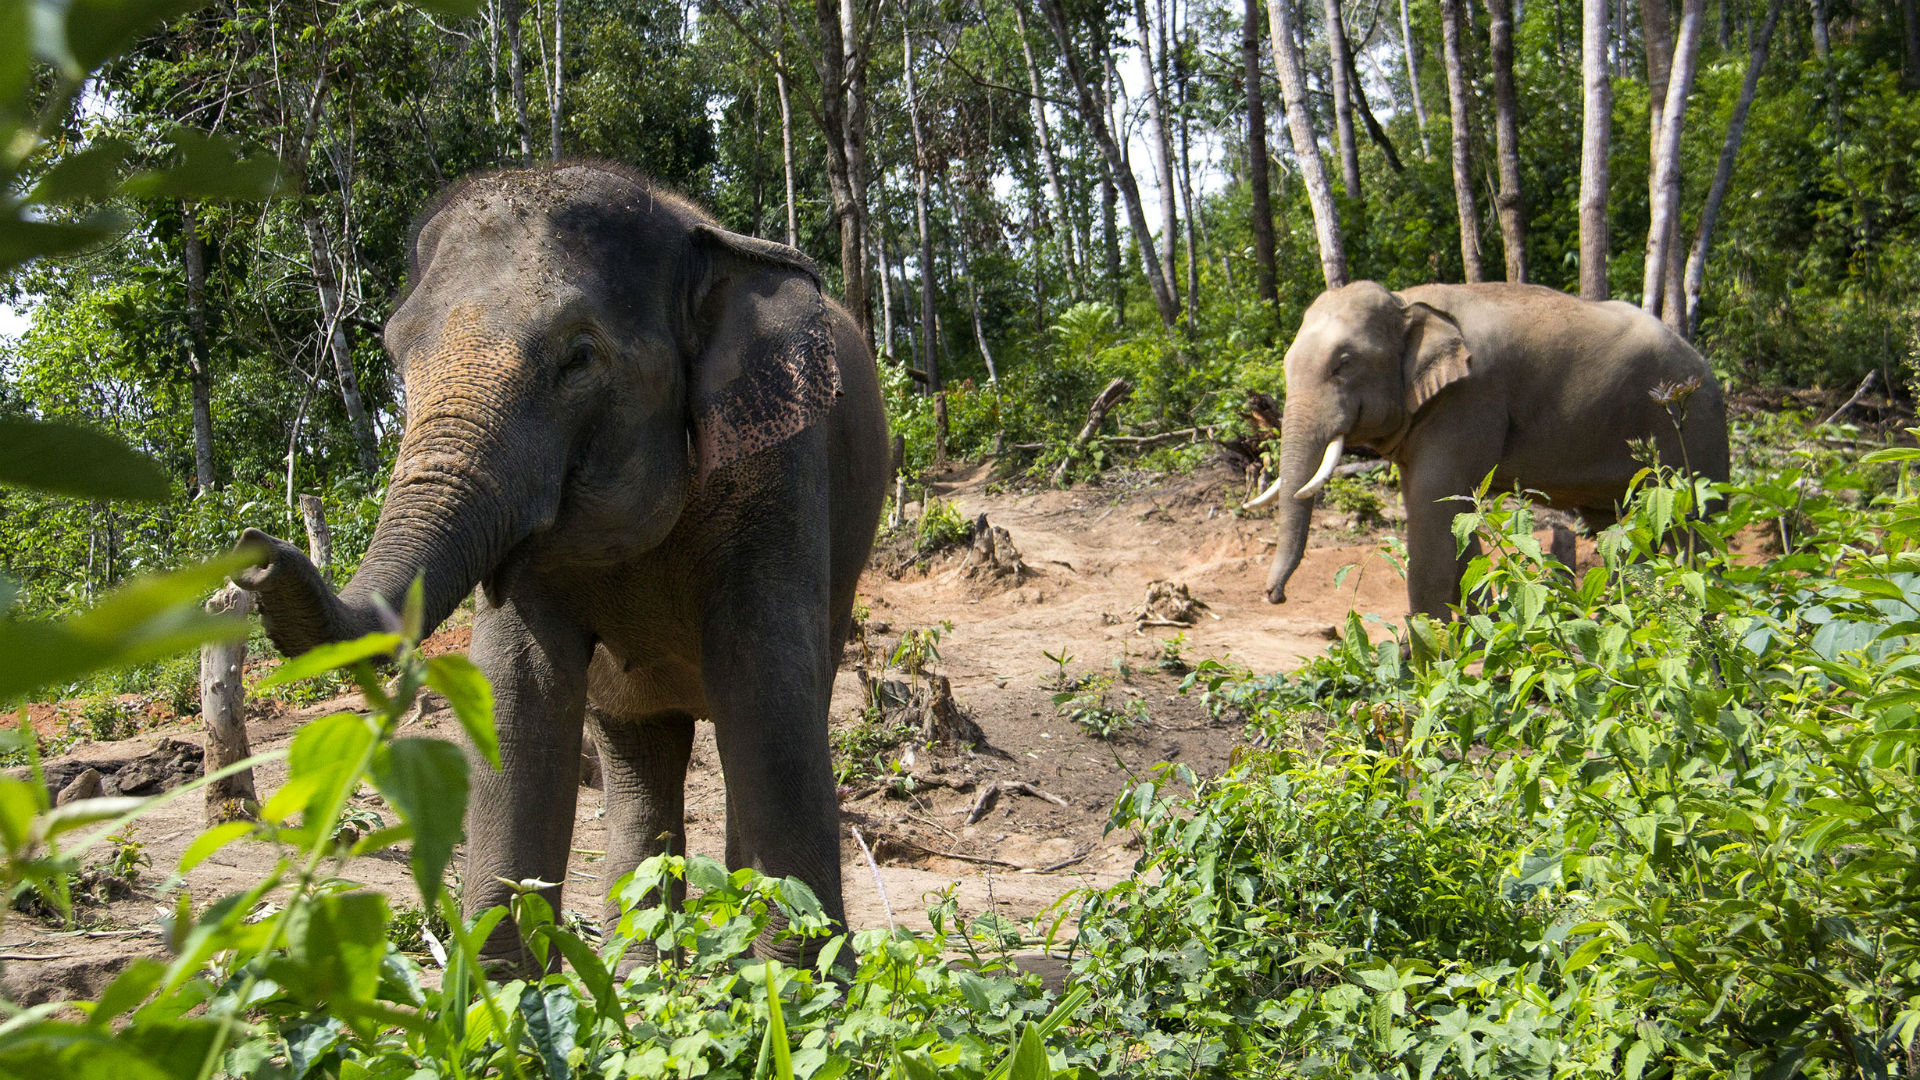 Elephants in the forest